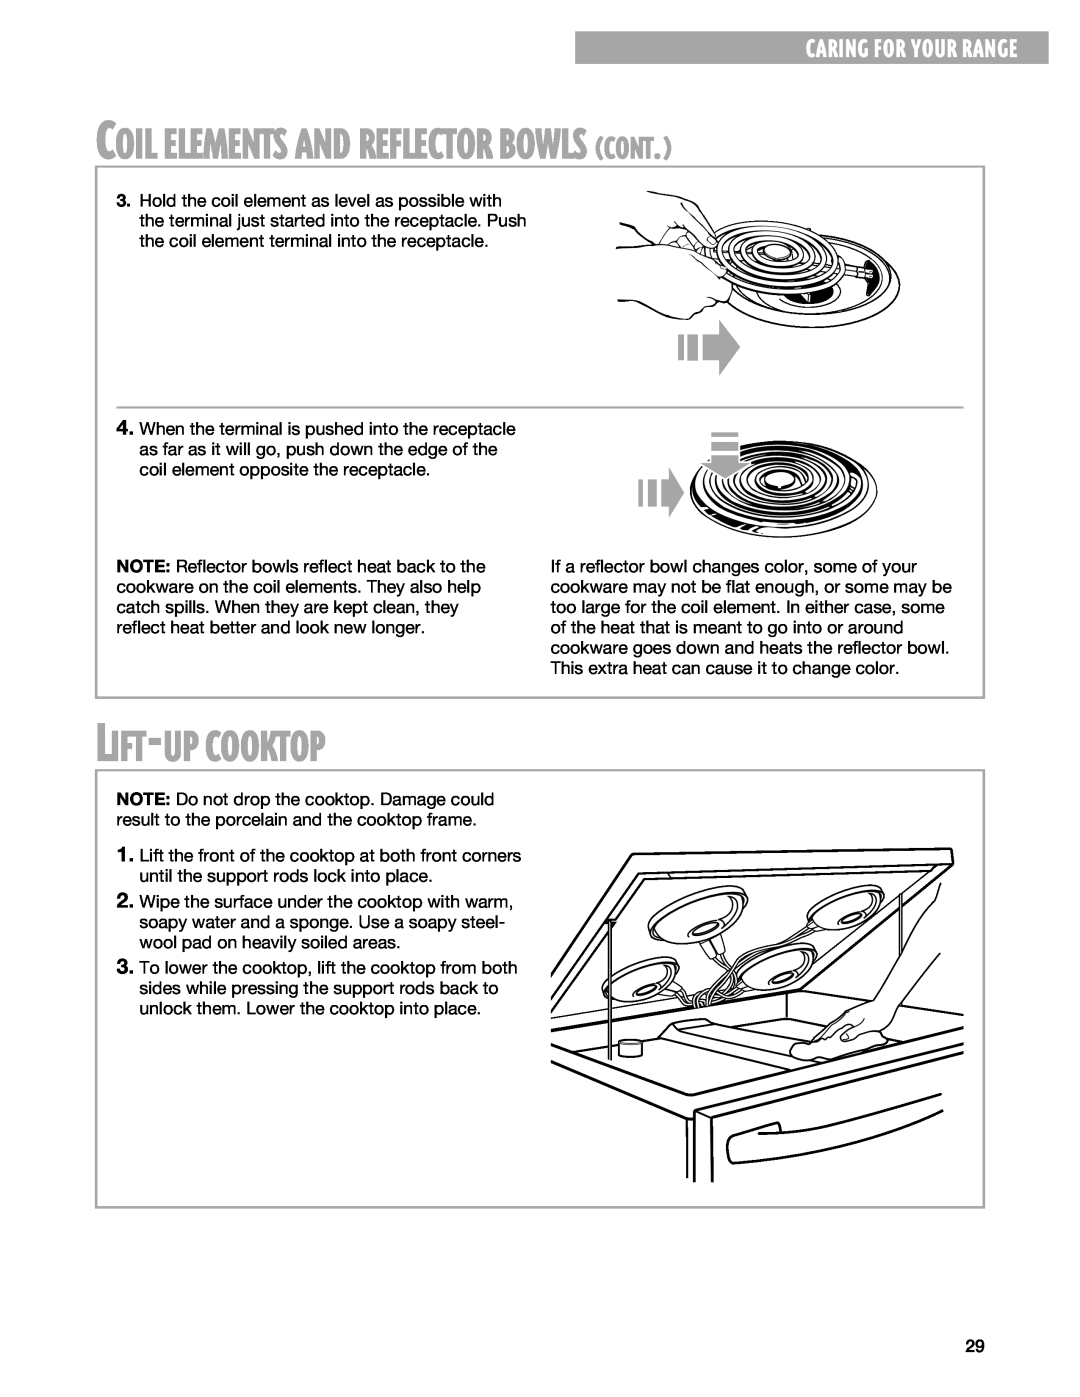 Whirlpool TES325G warranty Lift-Up Cooktop, Coil Elements And Reflector Bowls Cont, Caring For Your Range 